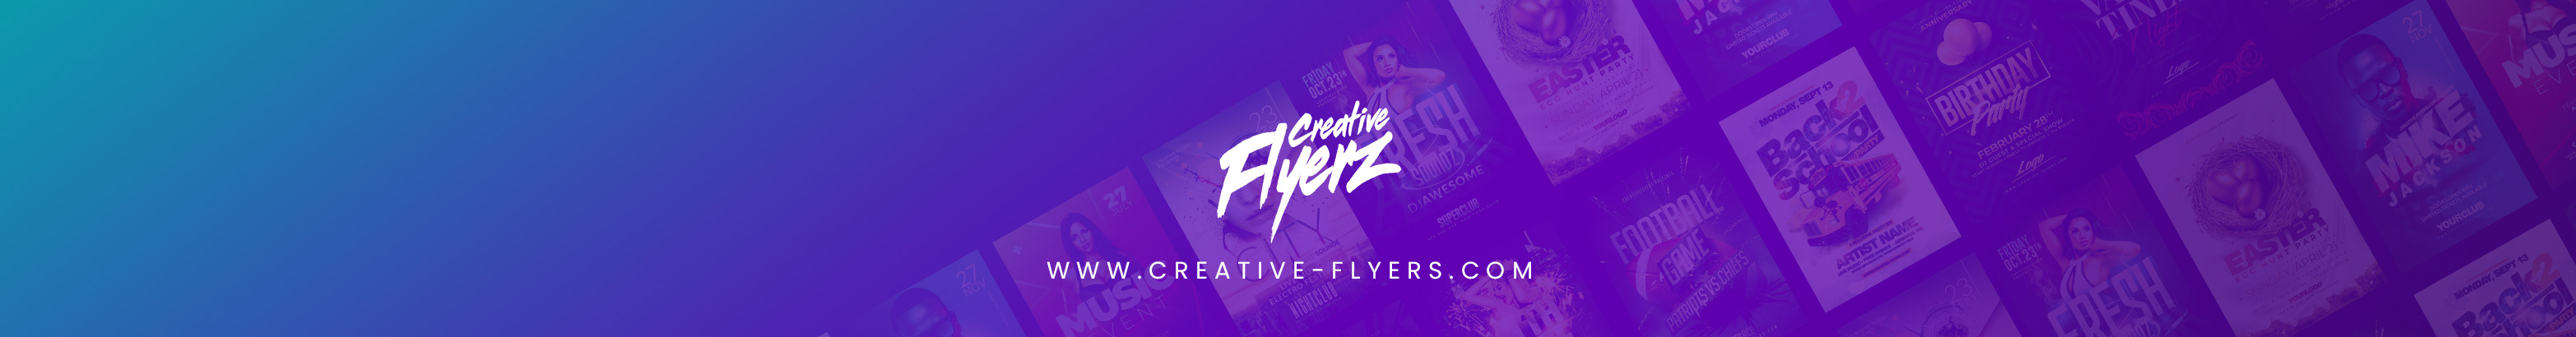 CreativeFlyers Edition's profile banner